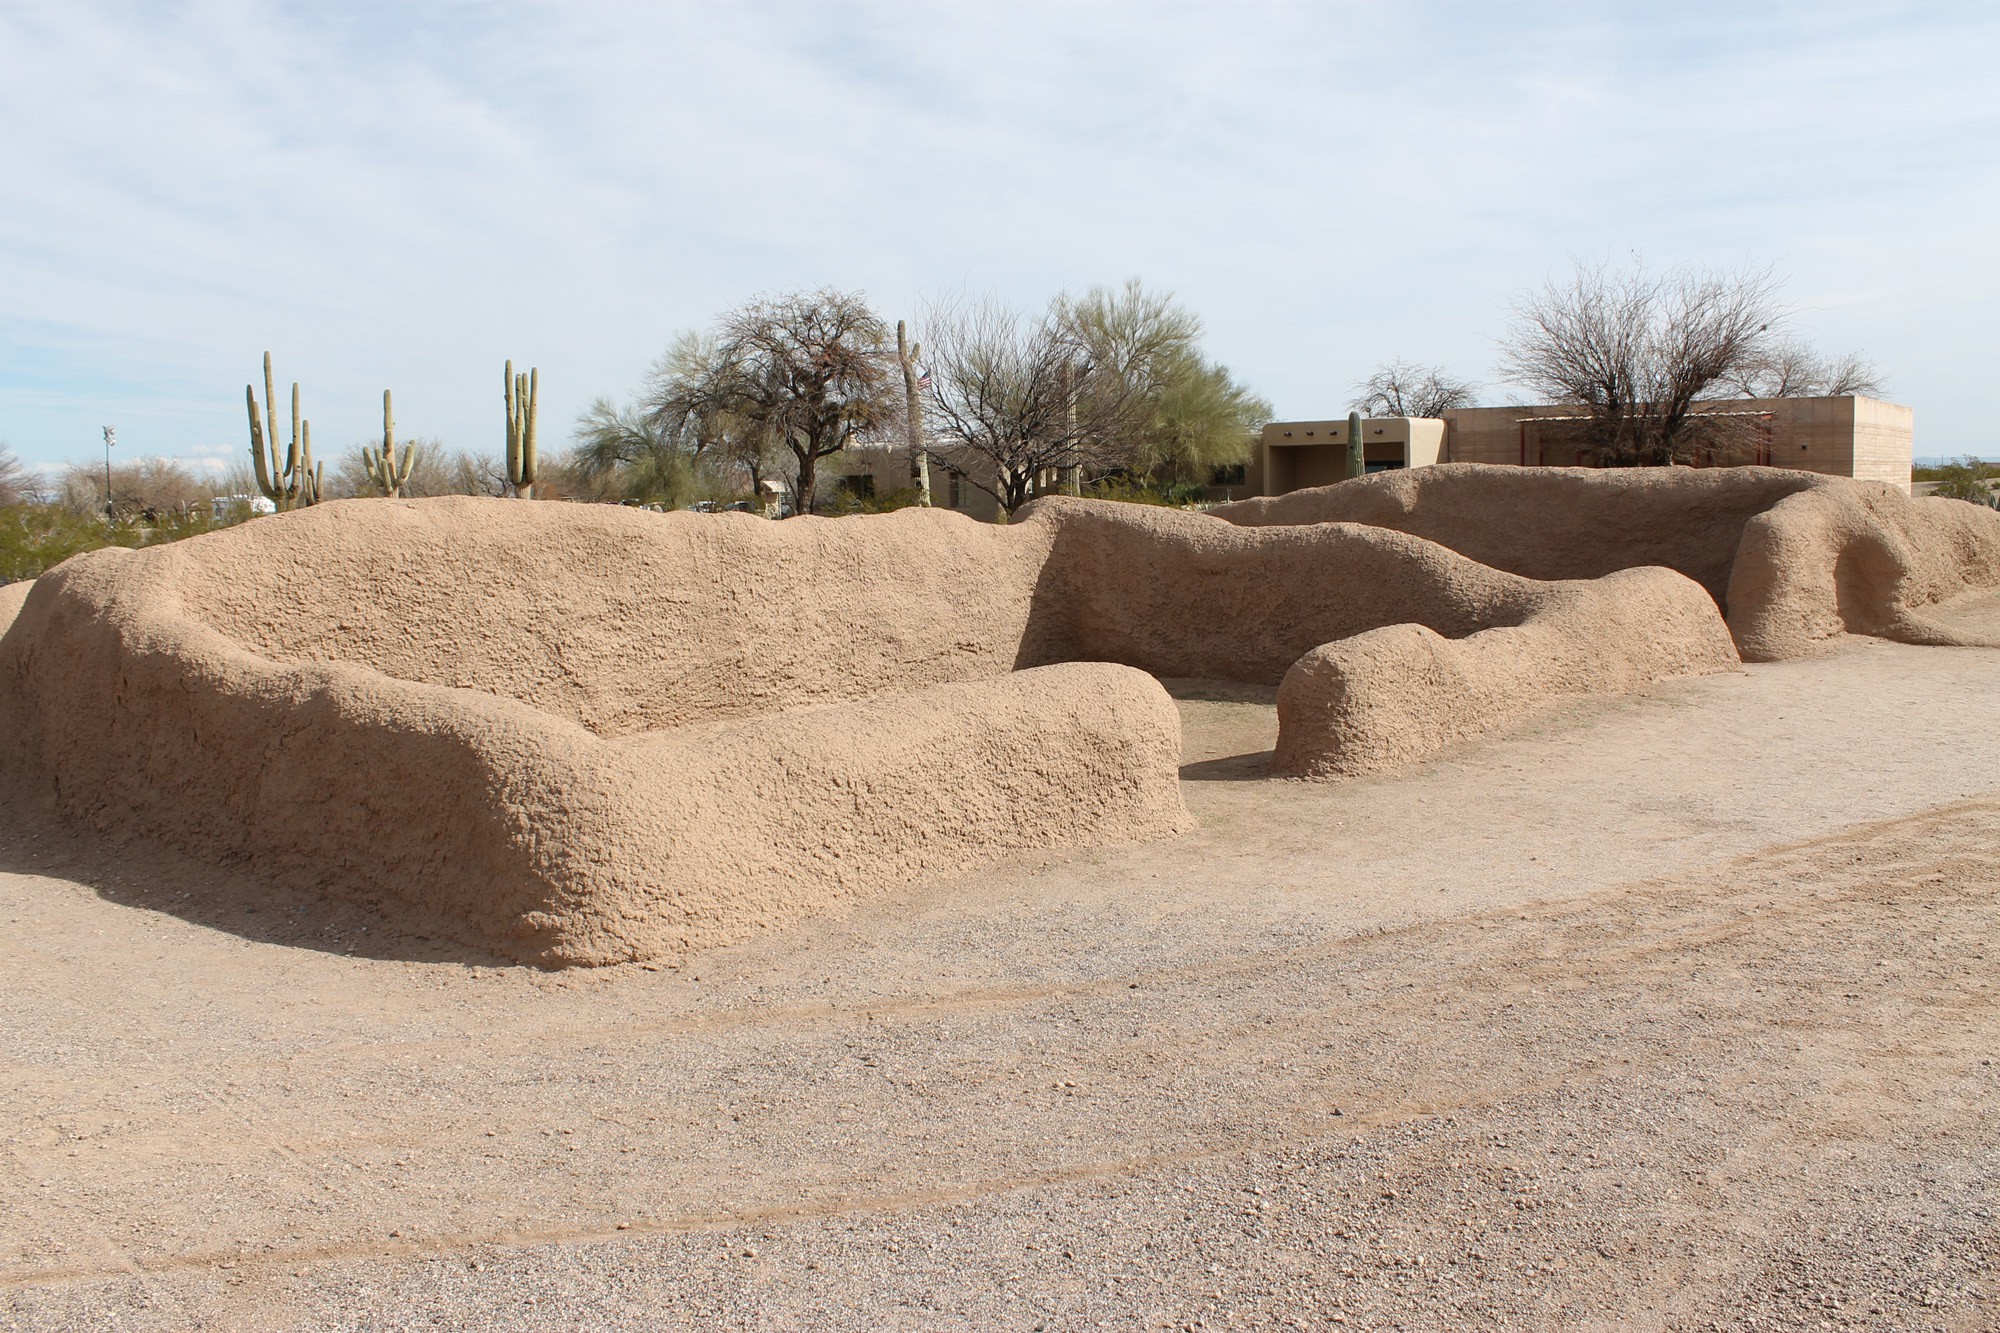 These mud huts were part of a Hohokam farming community that thrived along the Gila River for nearly 1,000 years.